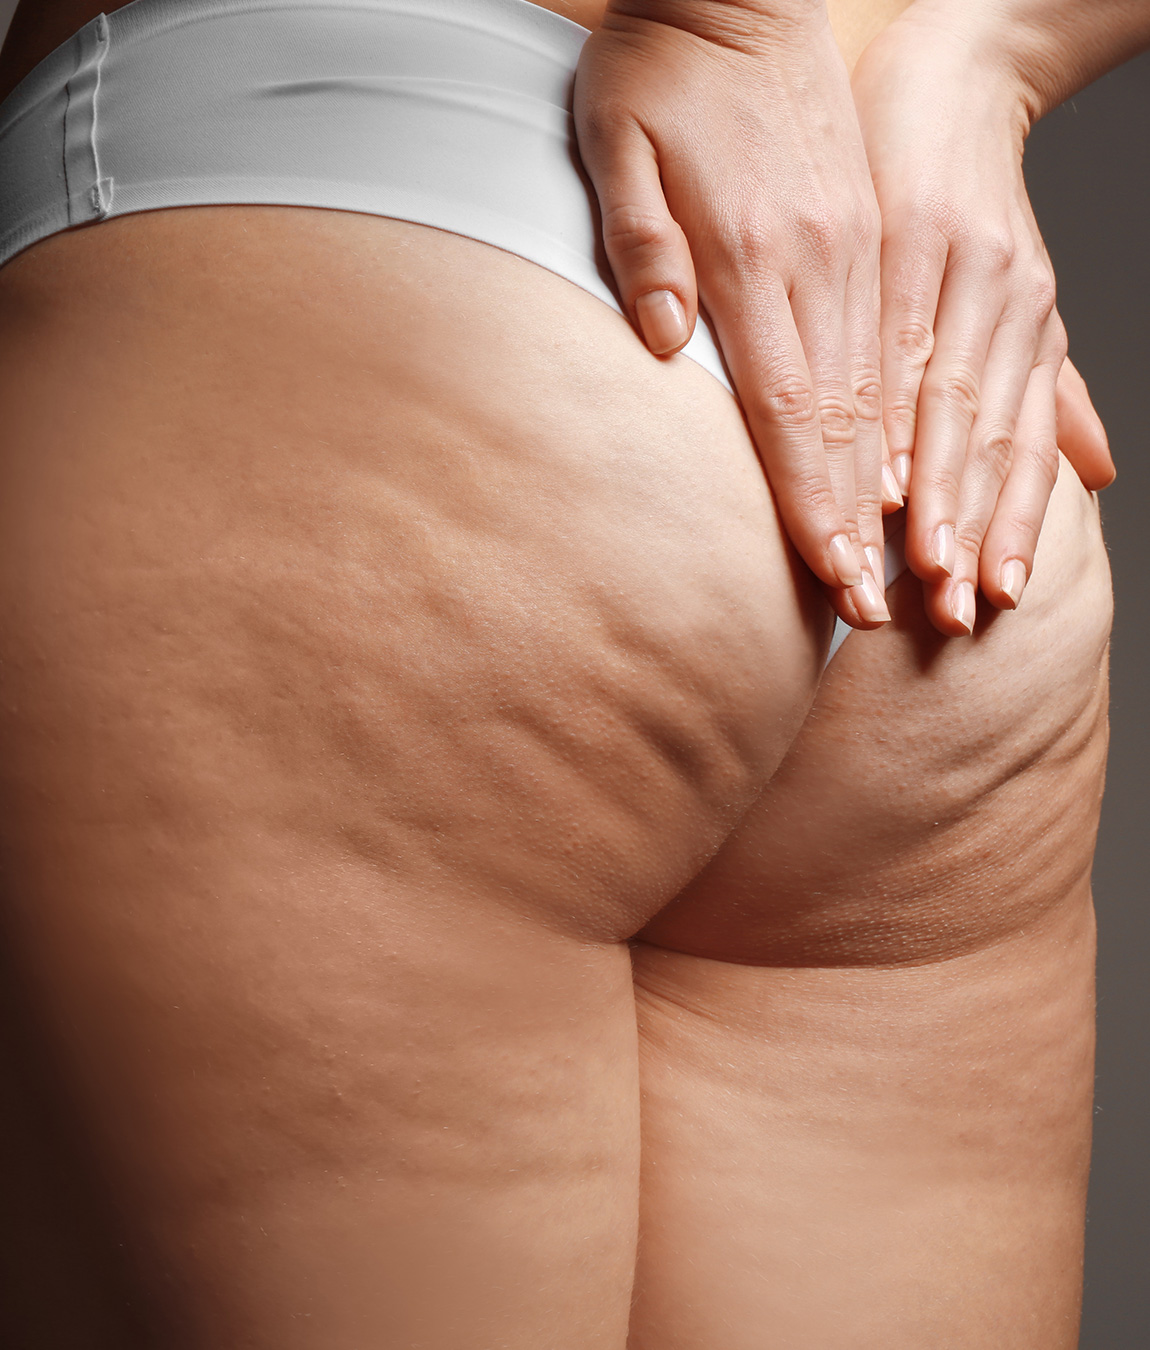 Close-up on a woman's buttocks